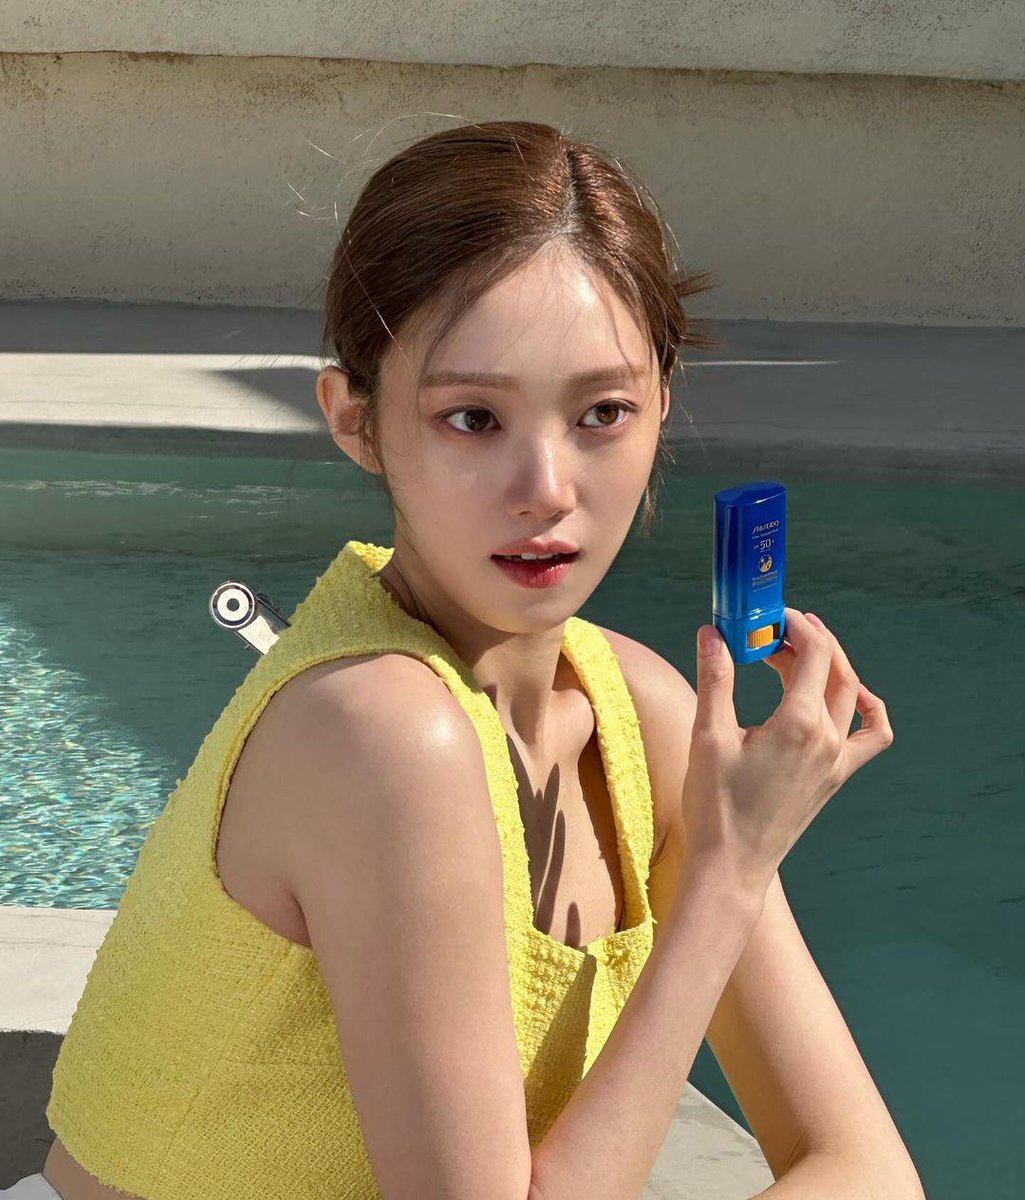 Lee Sung Kyung update on her IG 
Bts photos from Shiseido Campaign ✨ She's so Beautiful and cute same time! 
Love her so much! 

#LeeSungKyung #Shiseido #LeeSungKyoung #이성경